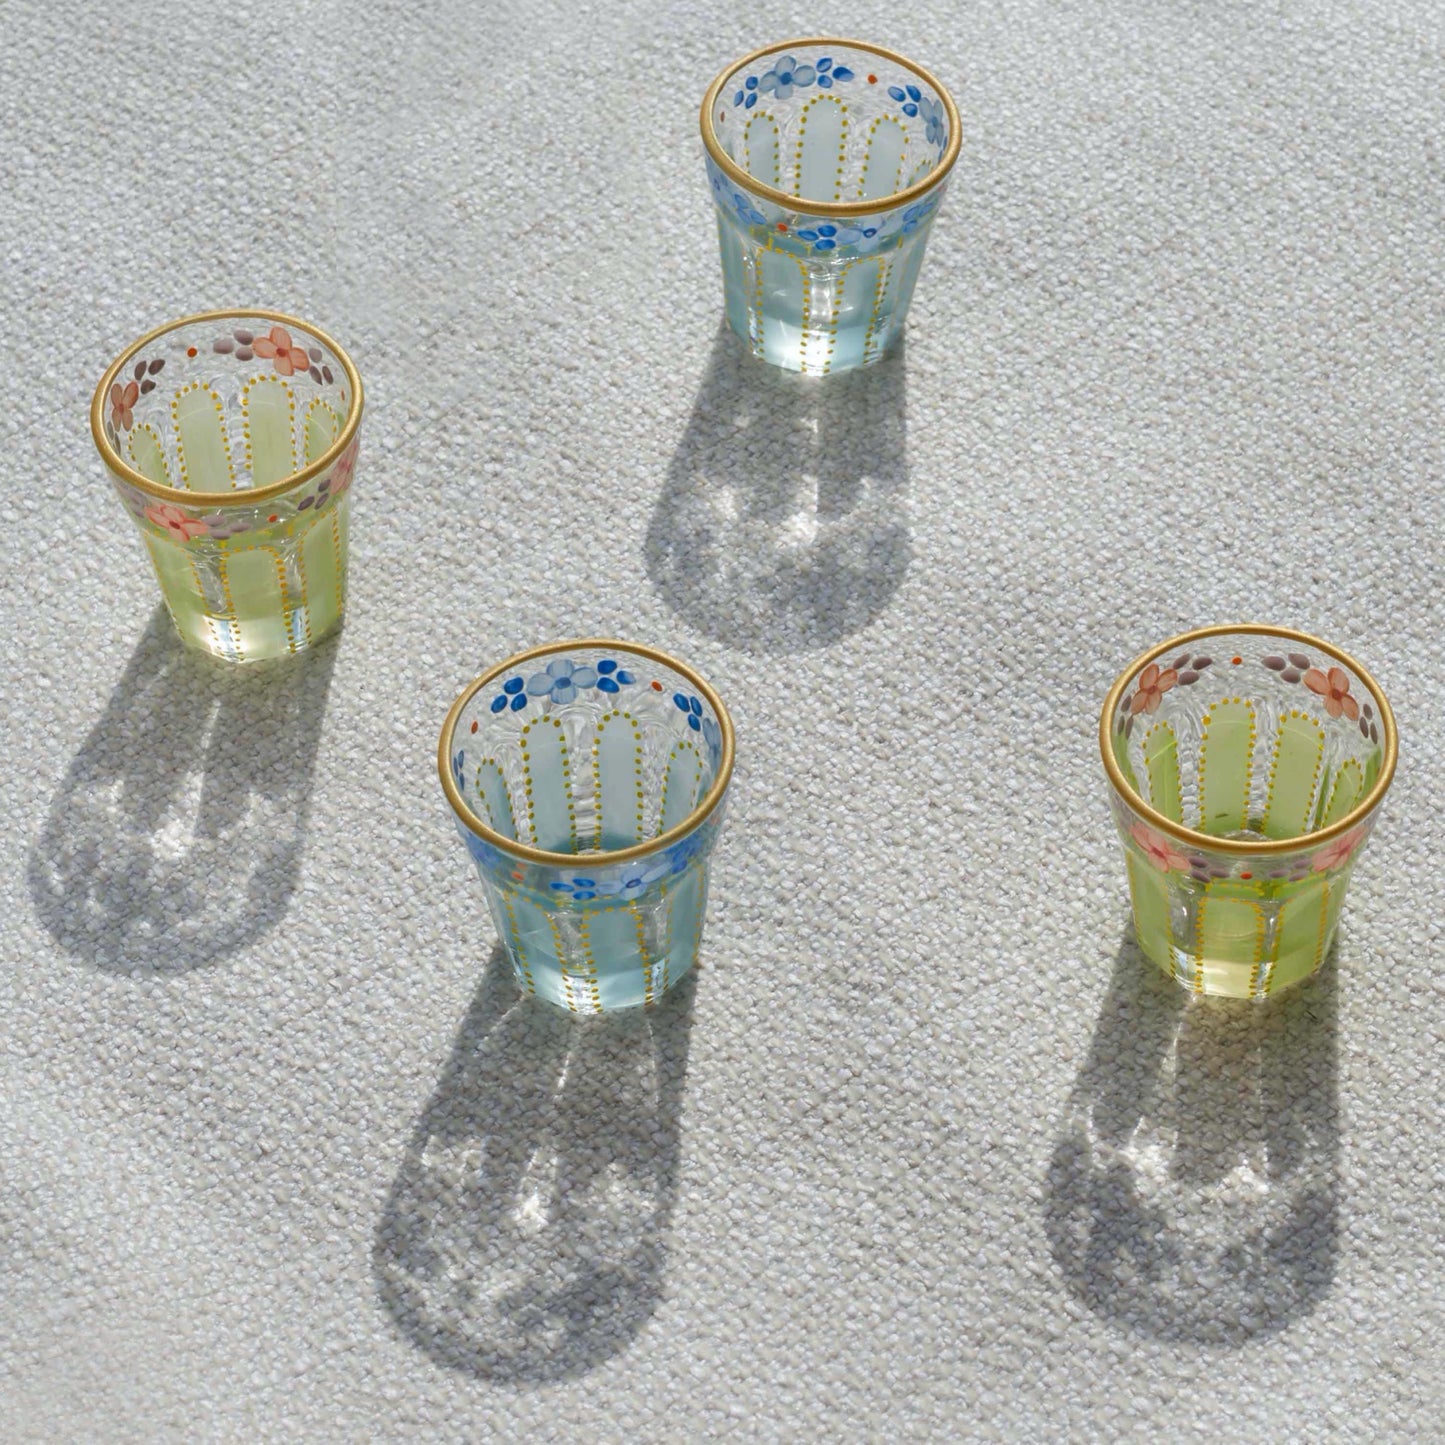 Nile blue and Lime shot glasses on a table